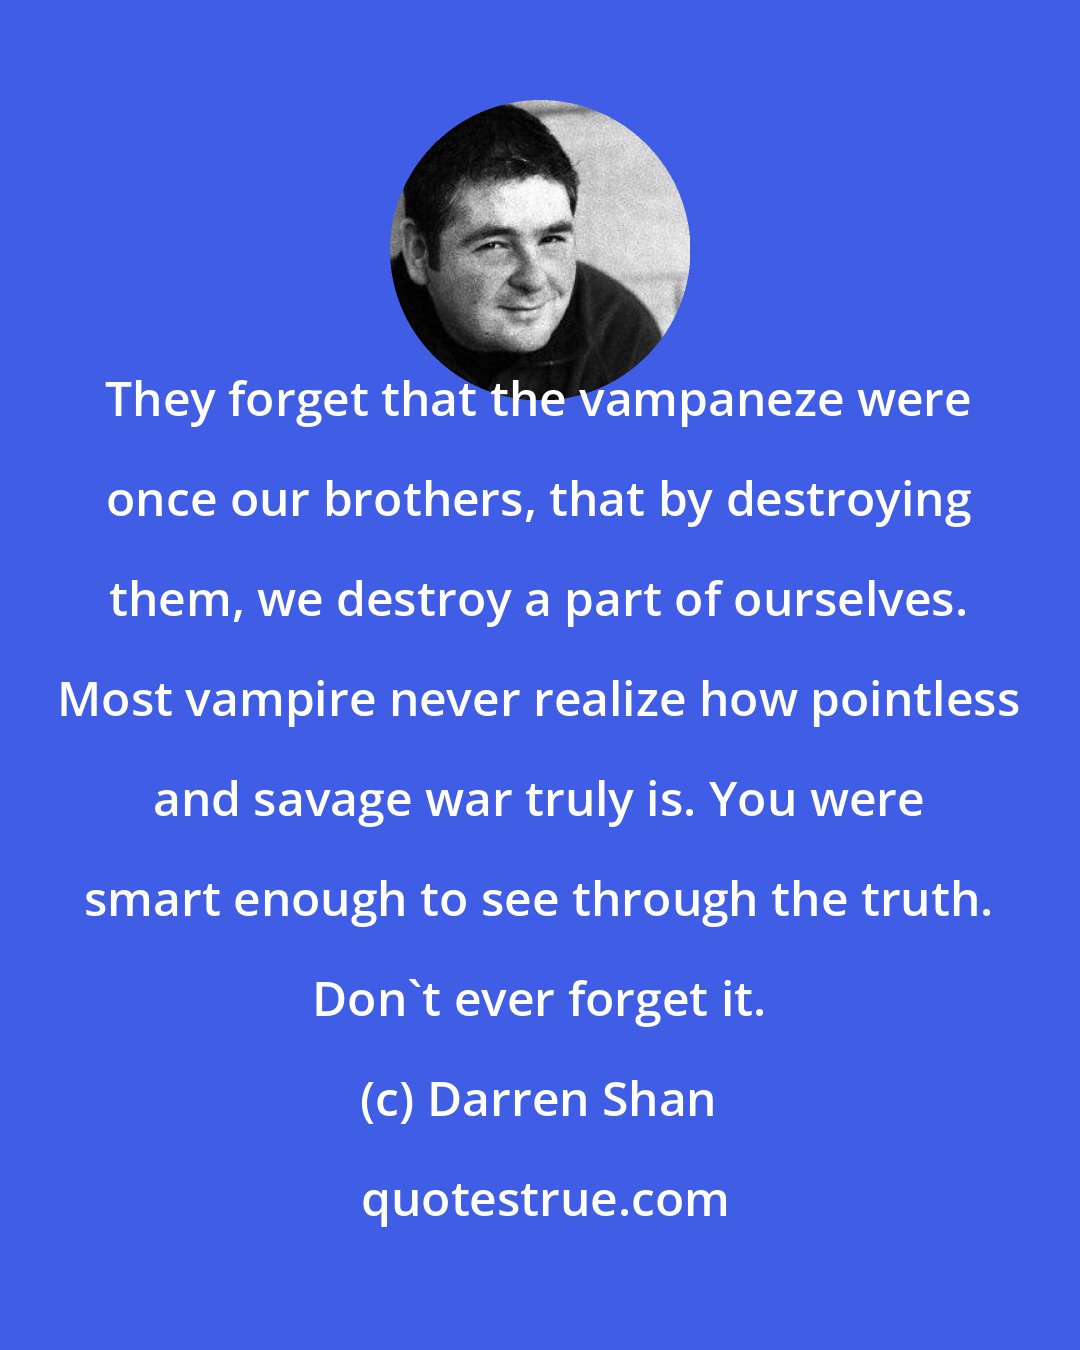 Darren Shan: They forget that the vampaneze were once our brothers, that by destroying them, we destroy a part of ourselves. Most vampire never realize how pointless and savage war truly is. You were smart enough to see through the truth. Don't ever forget it.